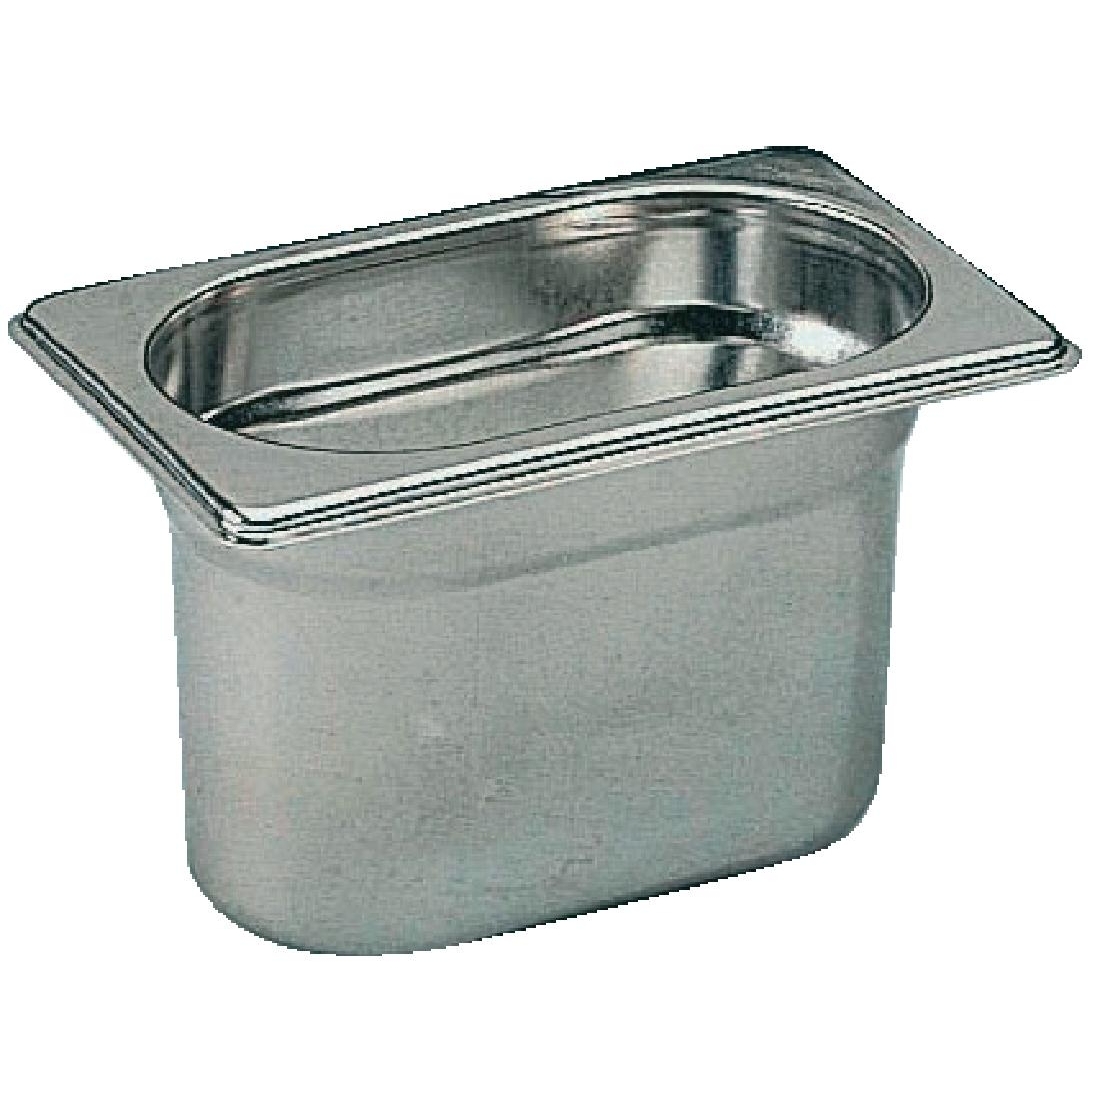 Bourgeat Stainless Steel 1/9 Gastronorm Pan 65mm